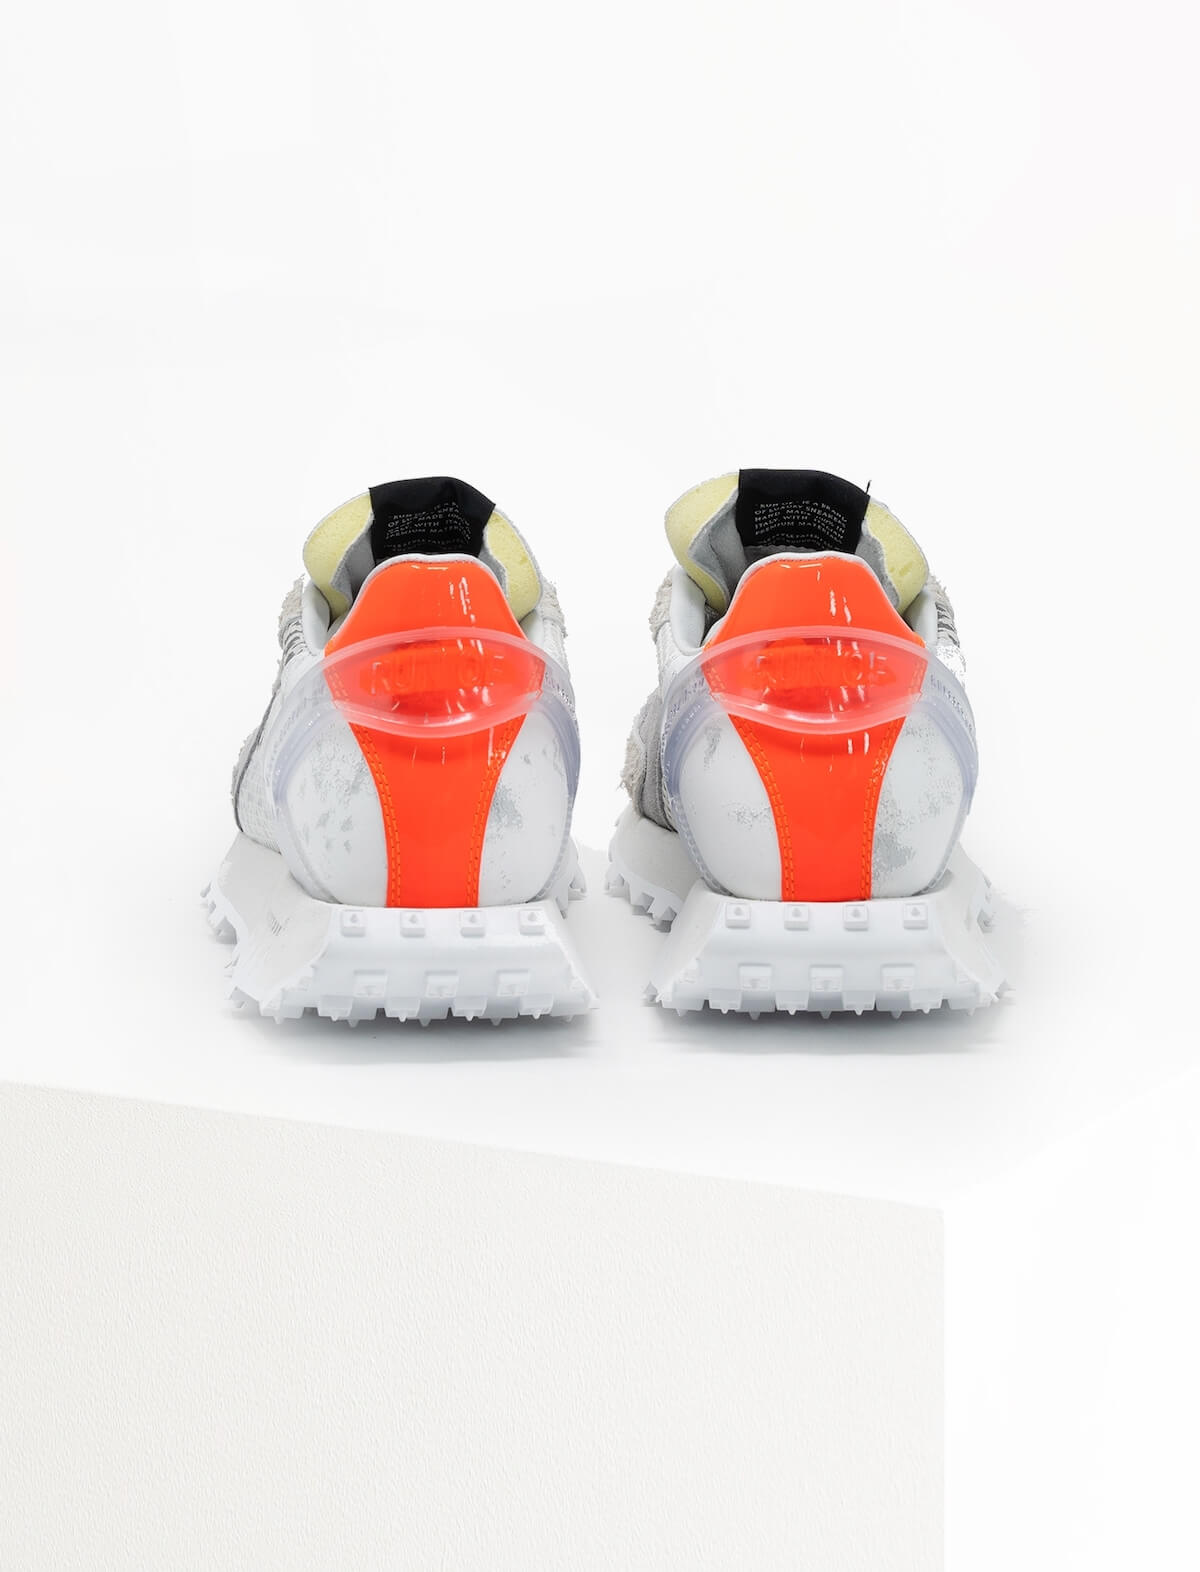 RUN OF Smoothie Sneakers in Grey and Orange Multi